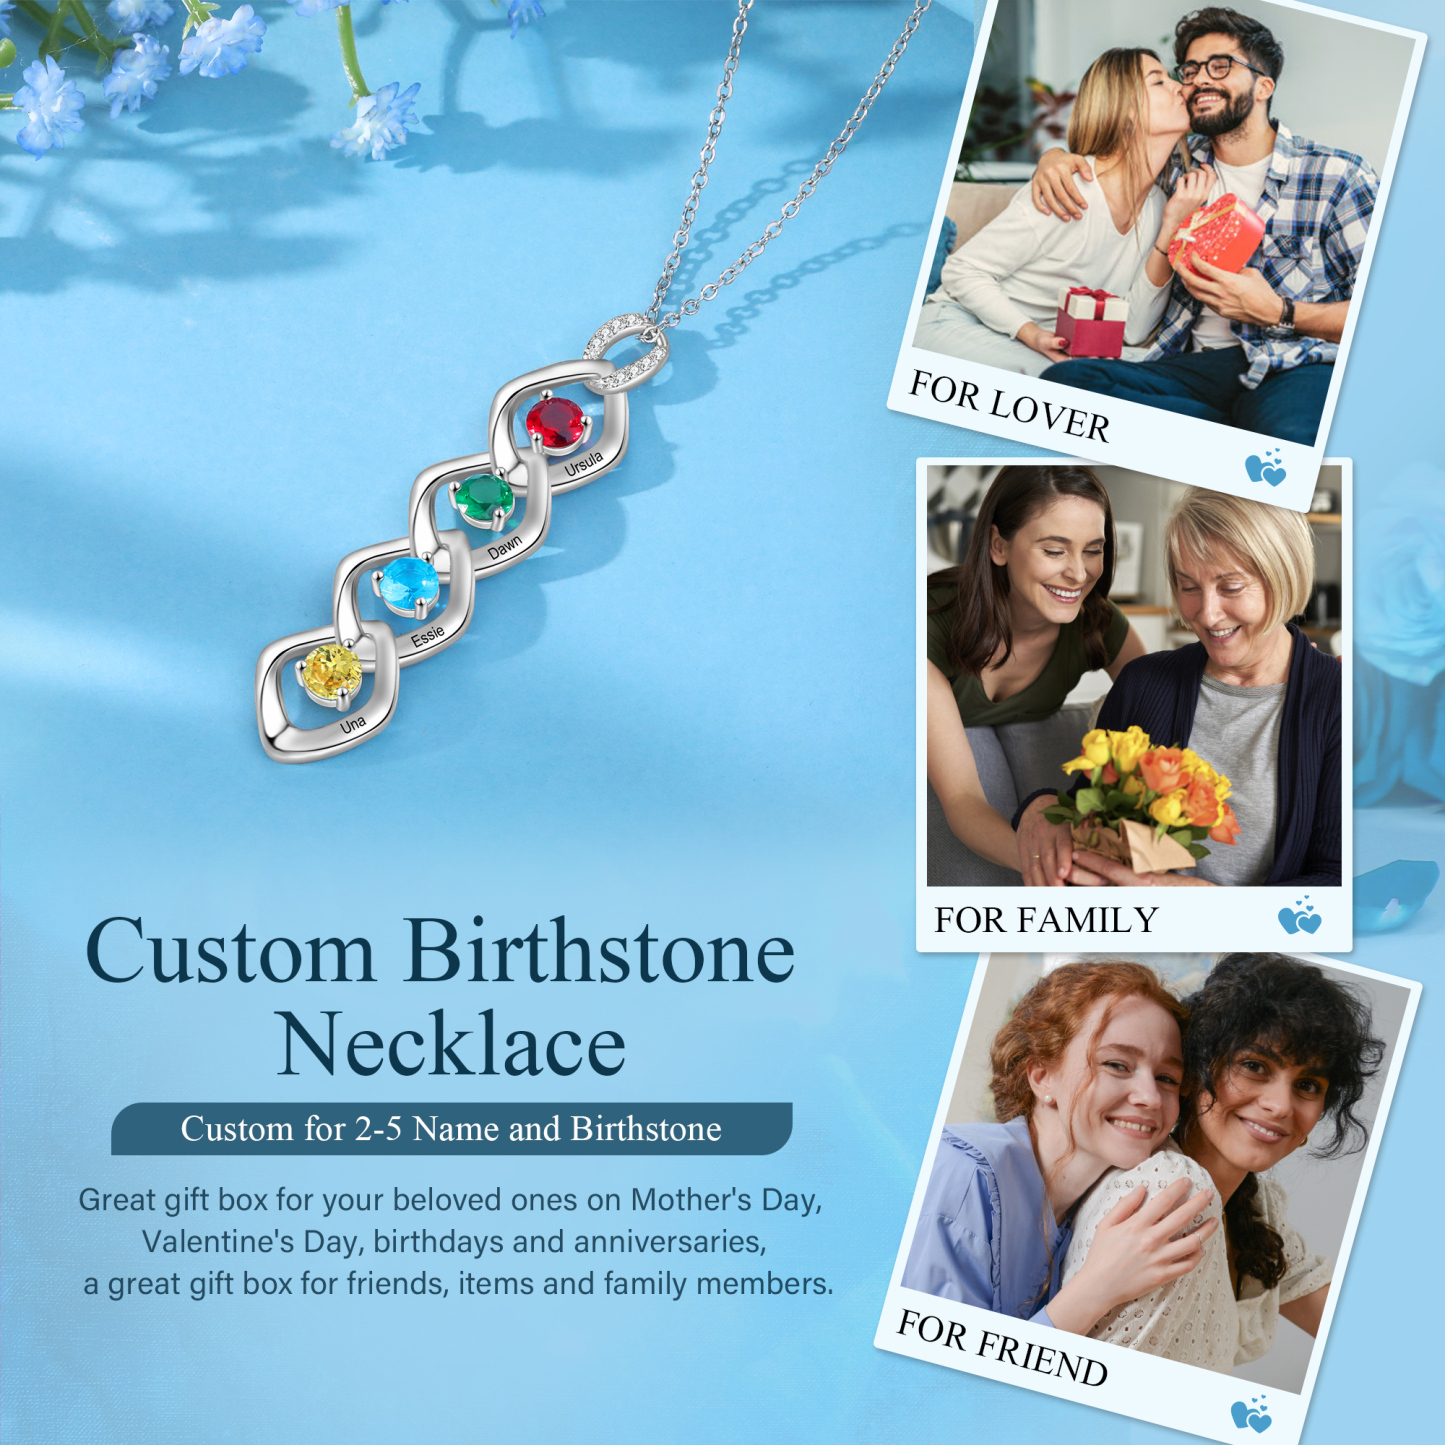 4 Names - Personalized Birthstone Necklace With Name Engraved For A Special Gift For Mom/Grandma